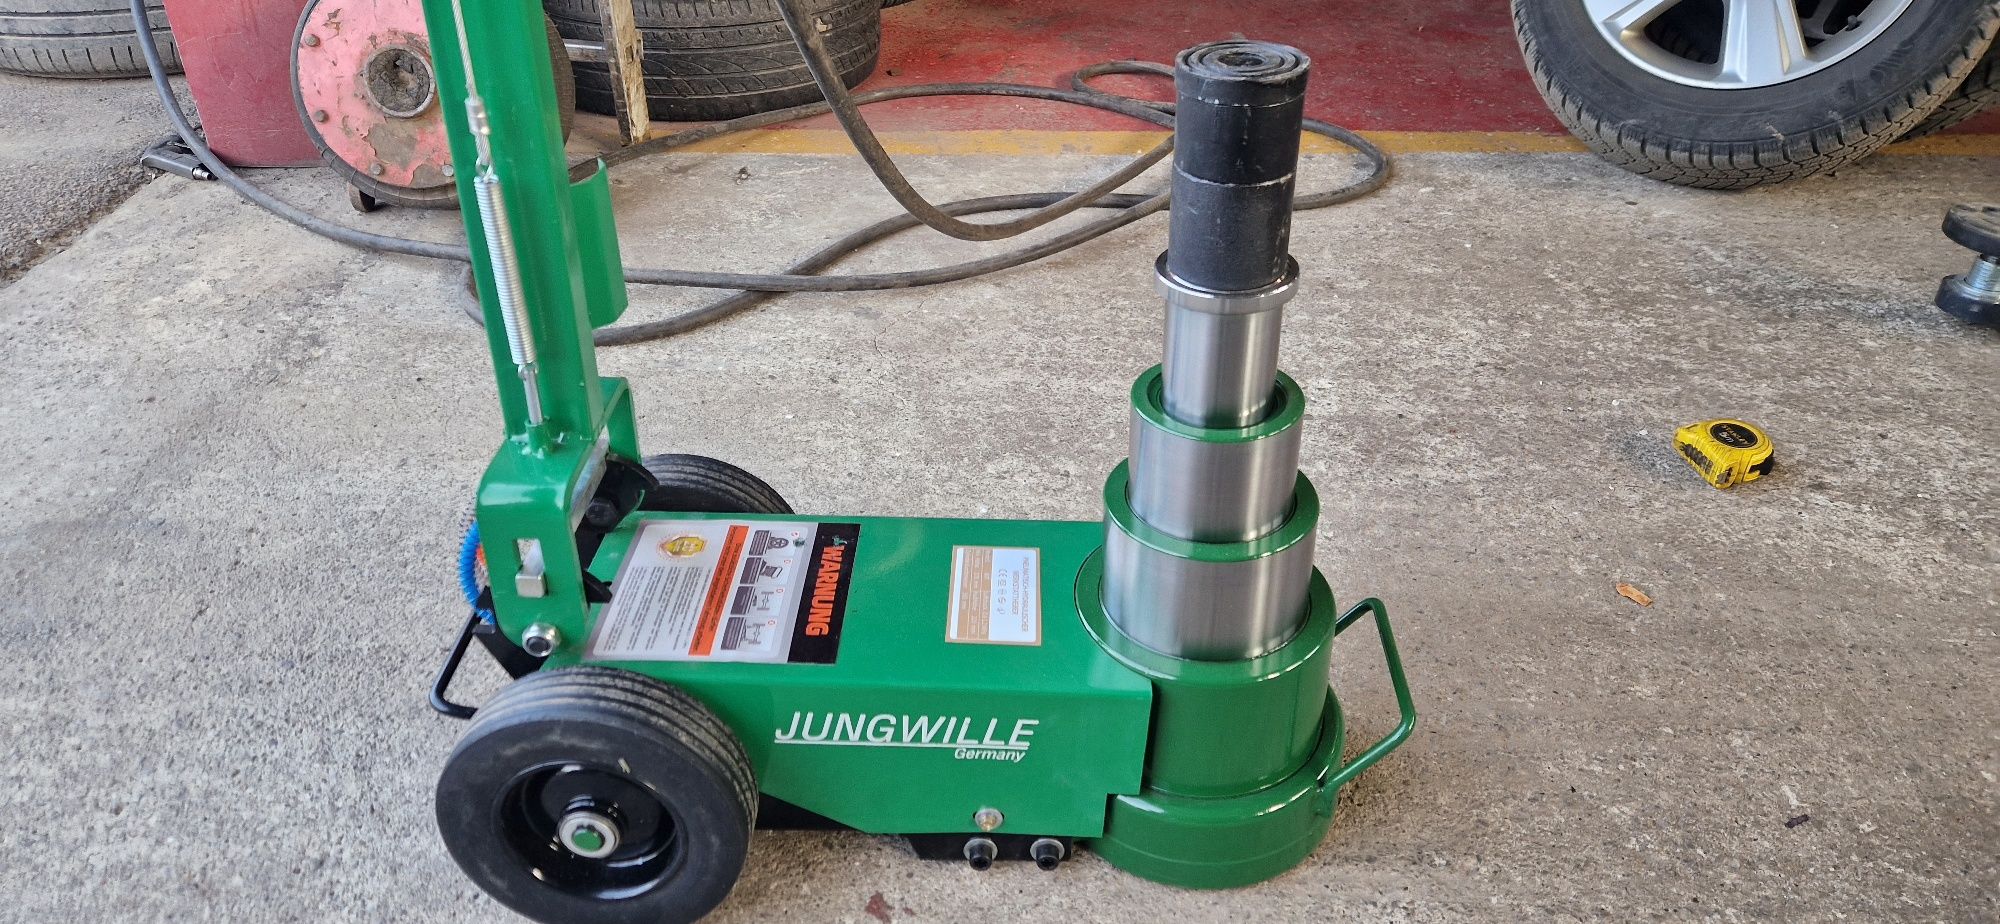 Cric profesional JUNGWILLE HidroPneumatic 80T nou